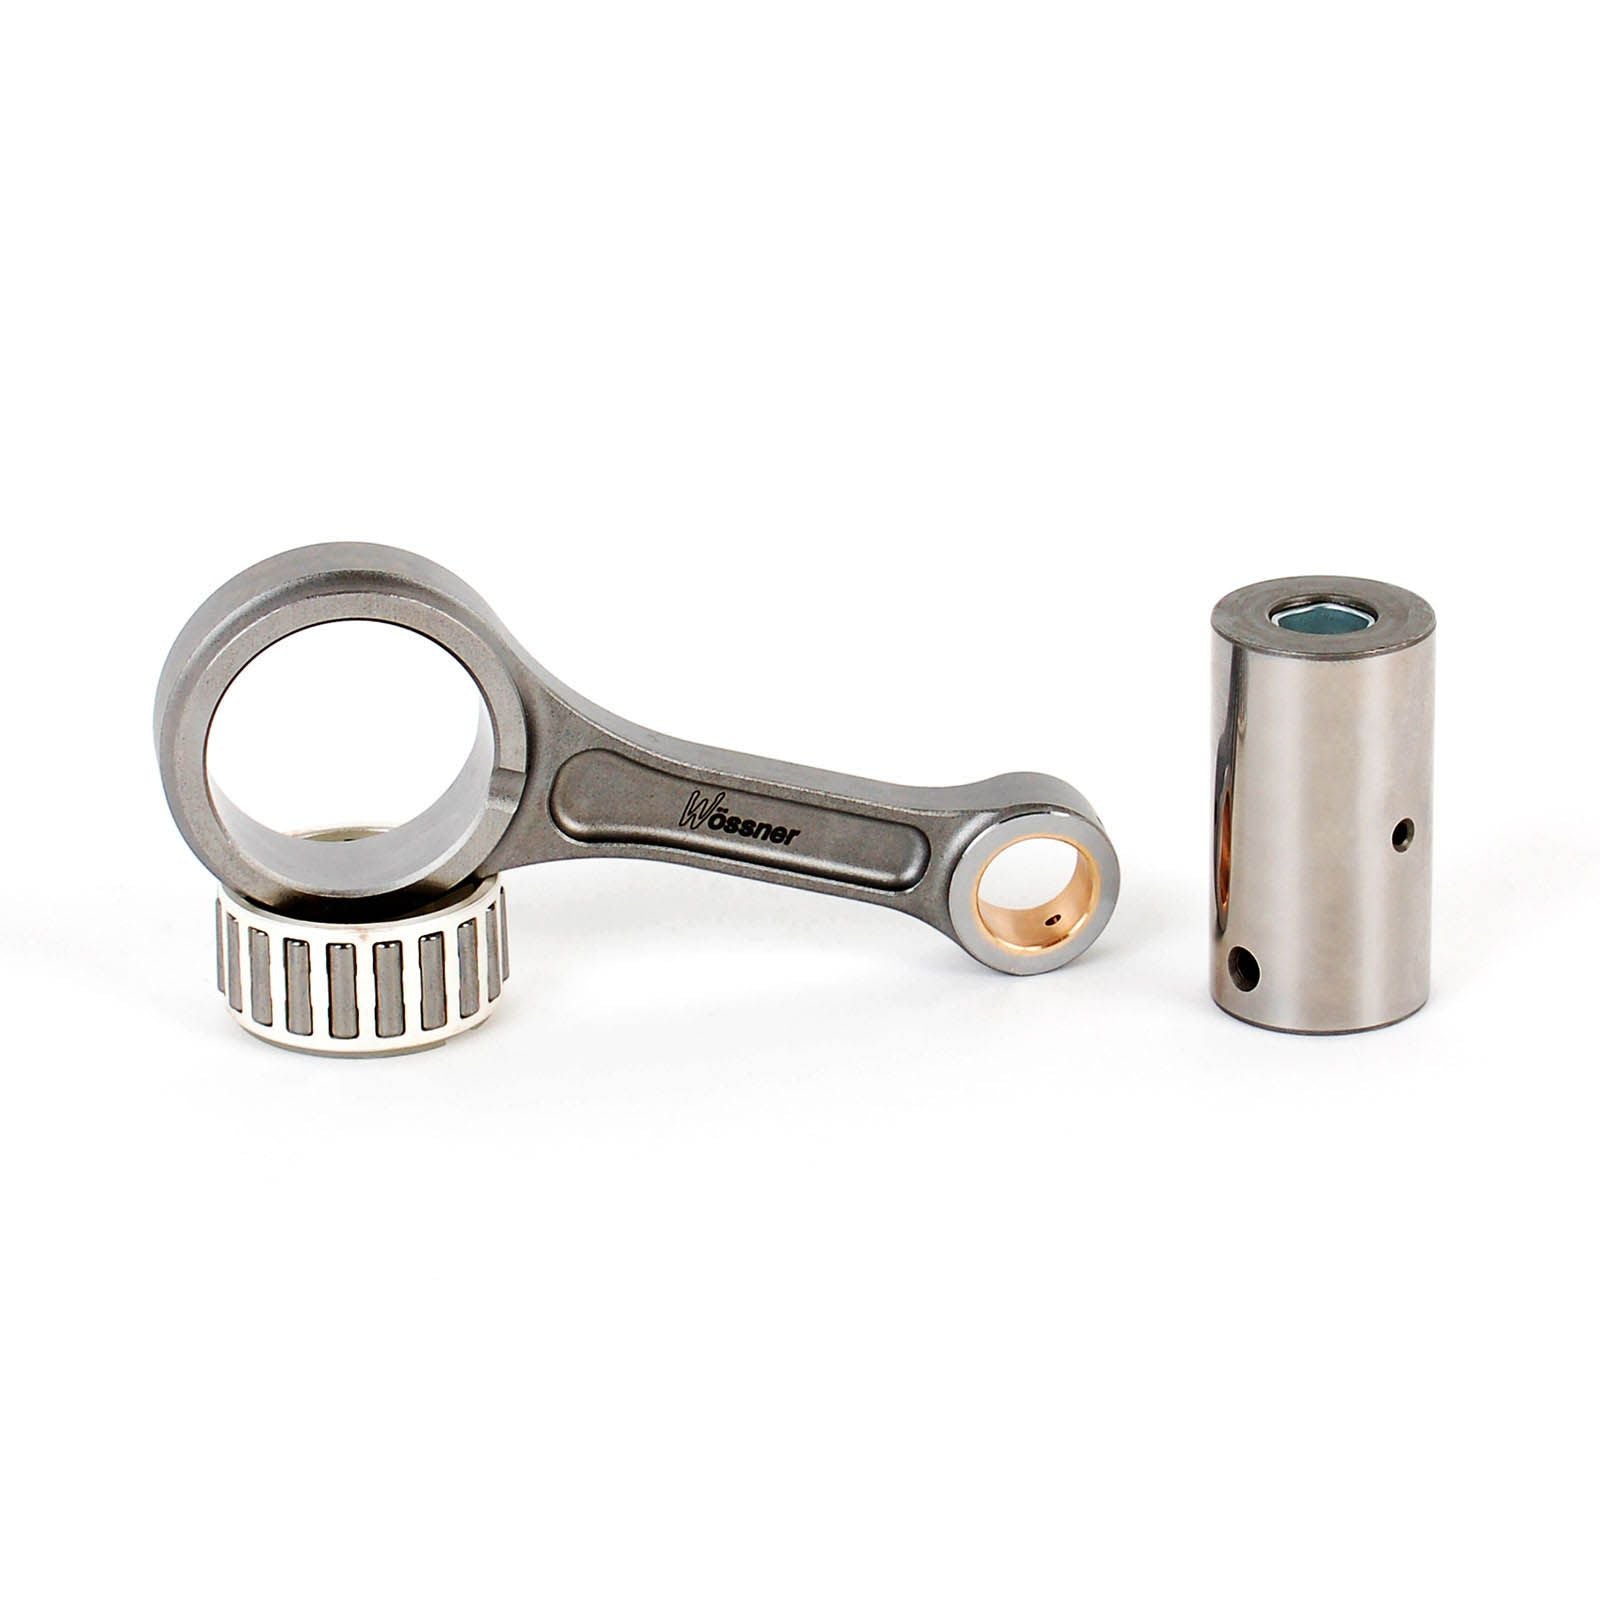 New WOSSNER Conrod For KTM EXC500 2014> (Including Engine Bearings) #WOP4066